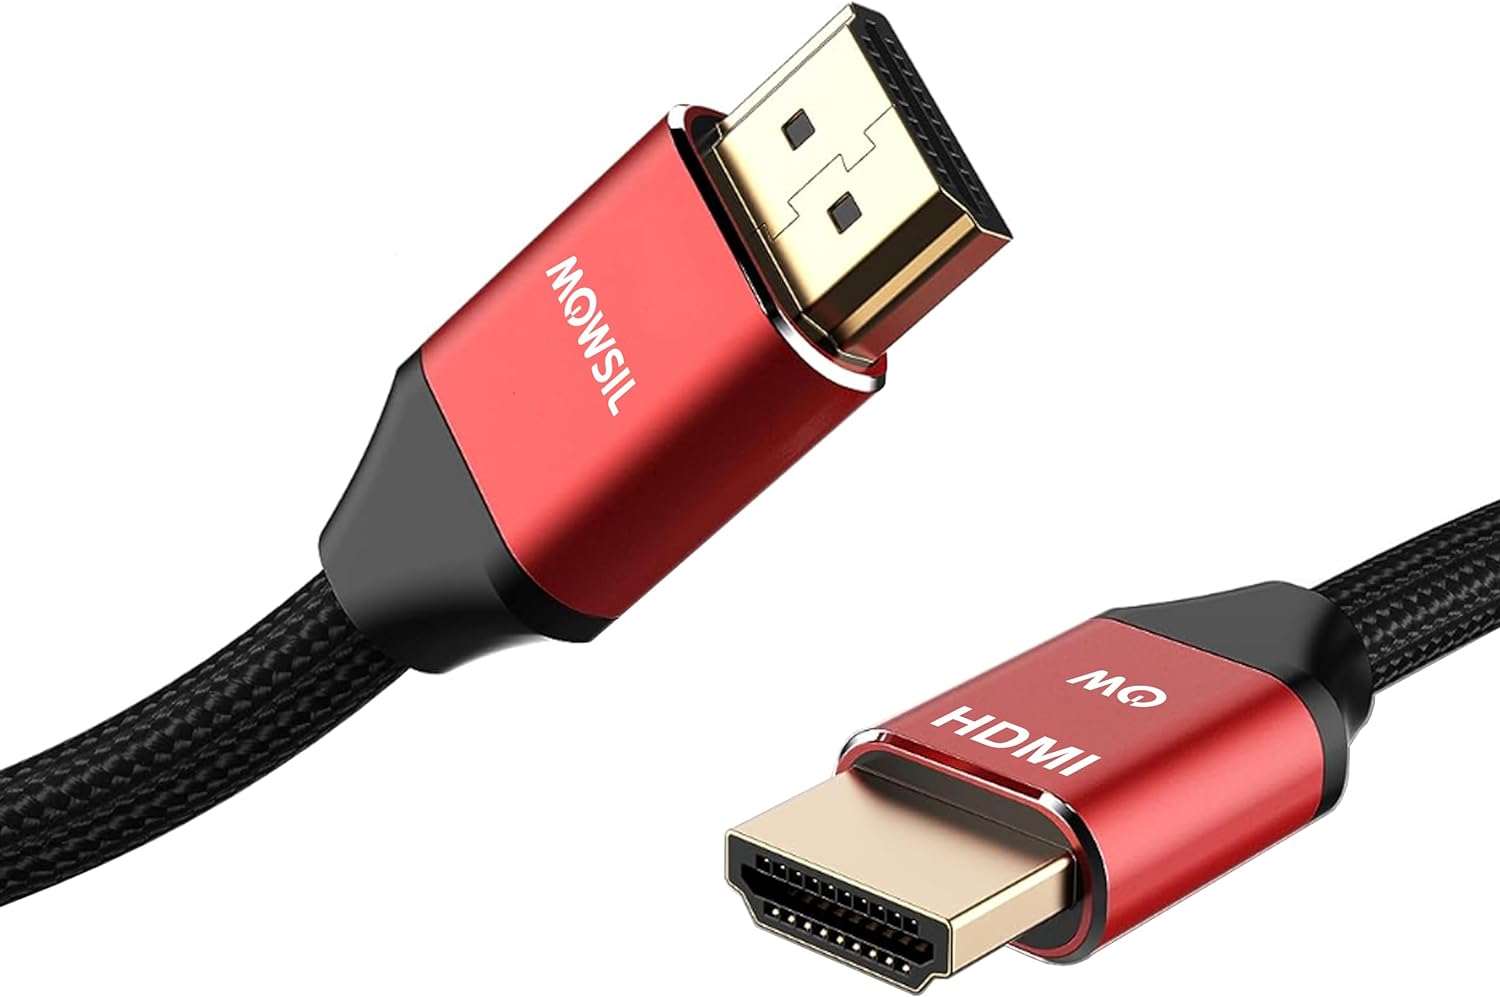 Mowsil_4K_HDMI_Cable_1.4_15_Mtr,_4K@30Hz_HDMI_1.4_High-Speed_HDMI_to_HDMI_Video_Ultra_HD_3D_4K_HDMI_Braided_Compatible_with_MacBook_Pro_TV_Switch_Xbox_PS5_PC_Laptop-1.jpg